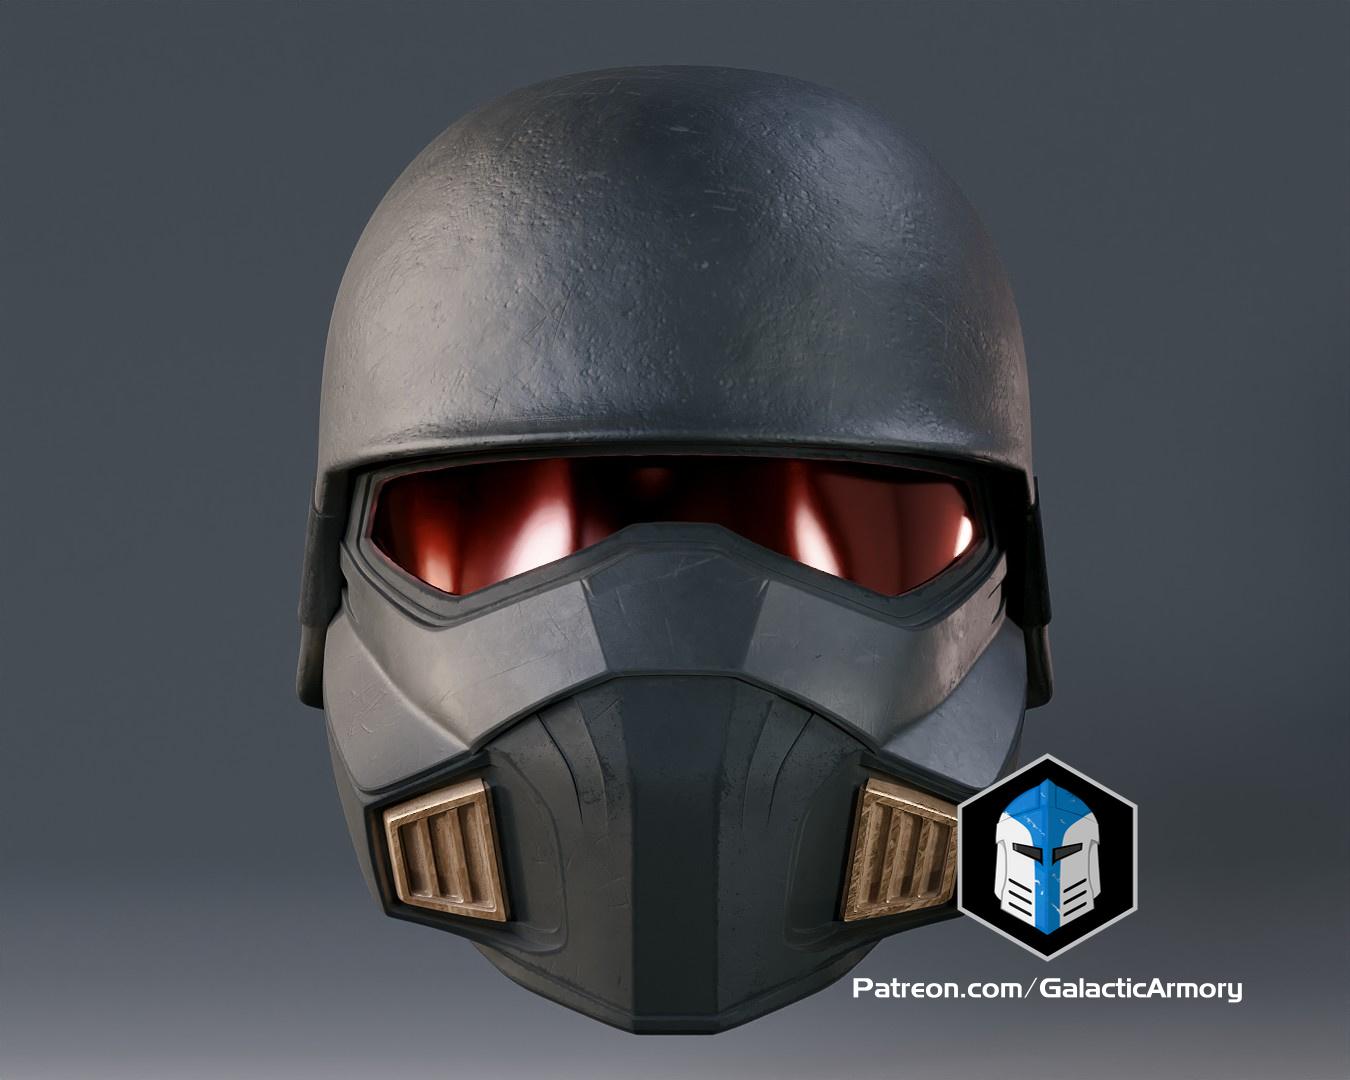 [New Files!] The Helldivers 2 Light Gunner helmet has been added to the Specialist rewards!